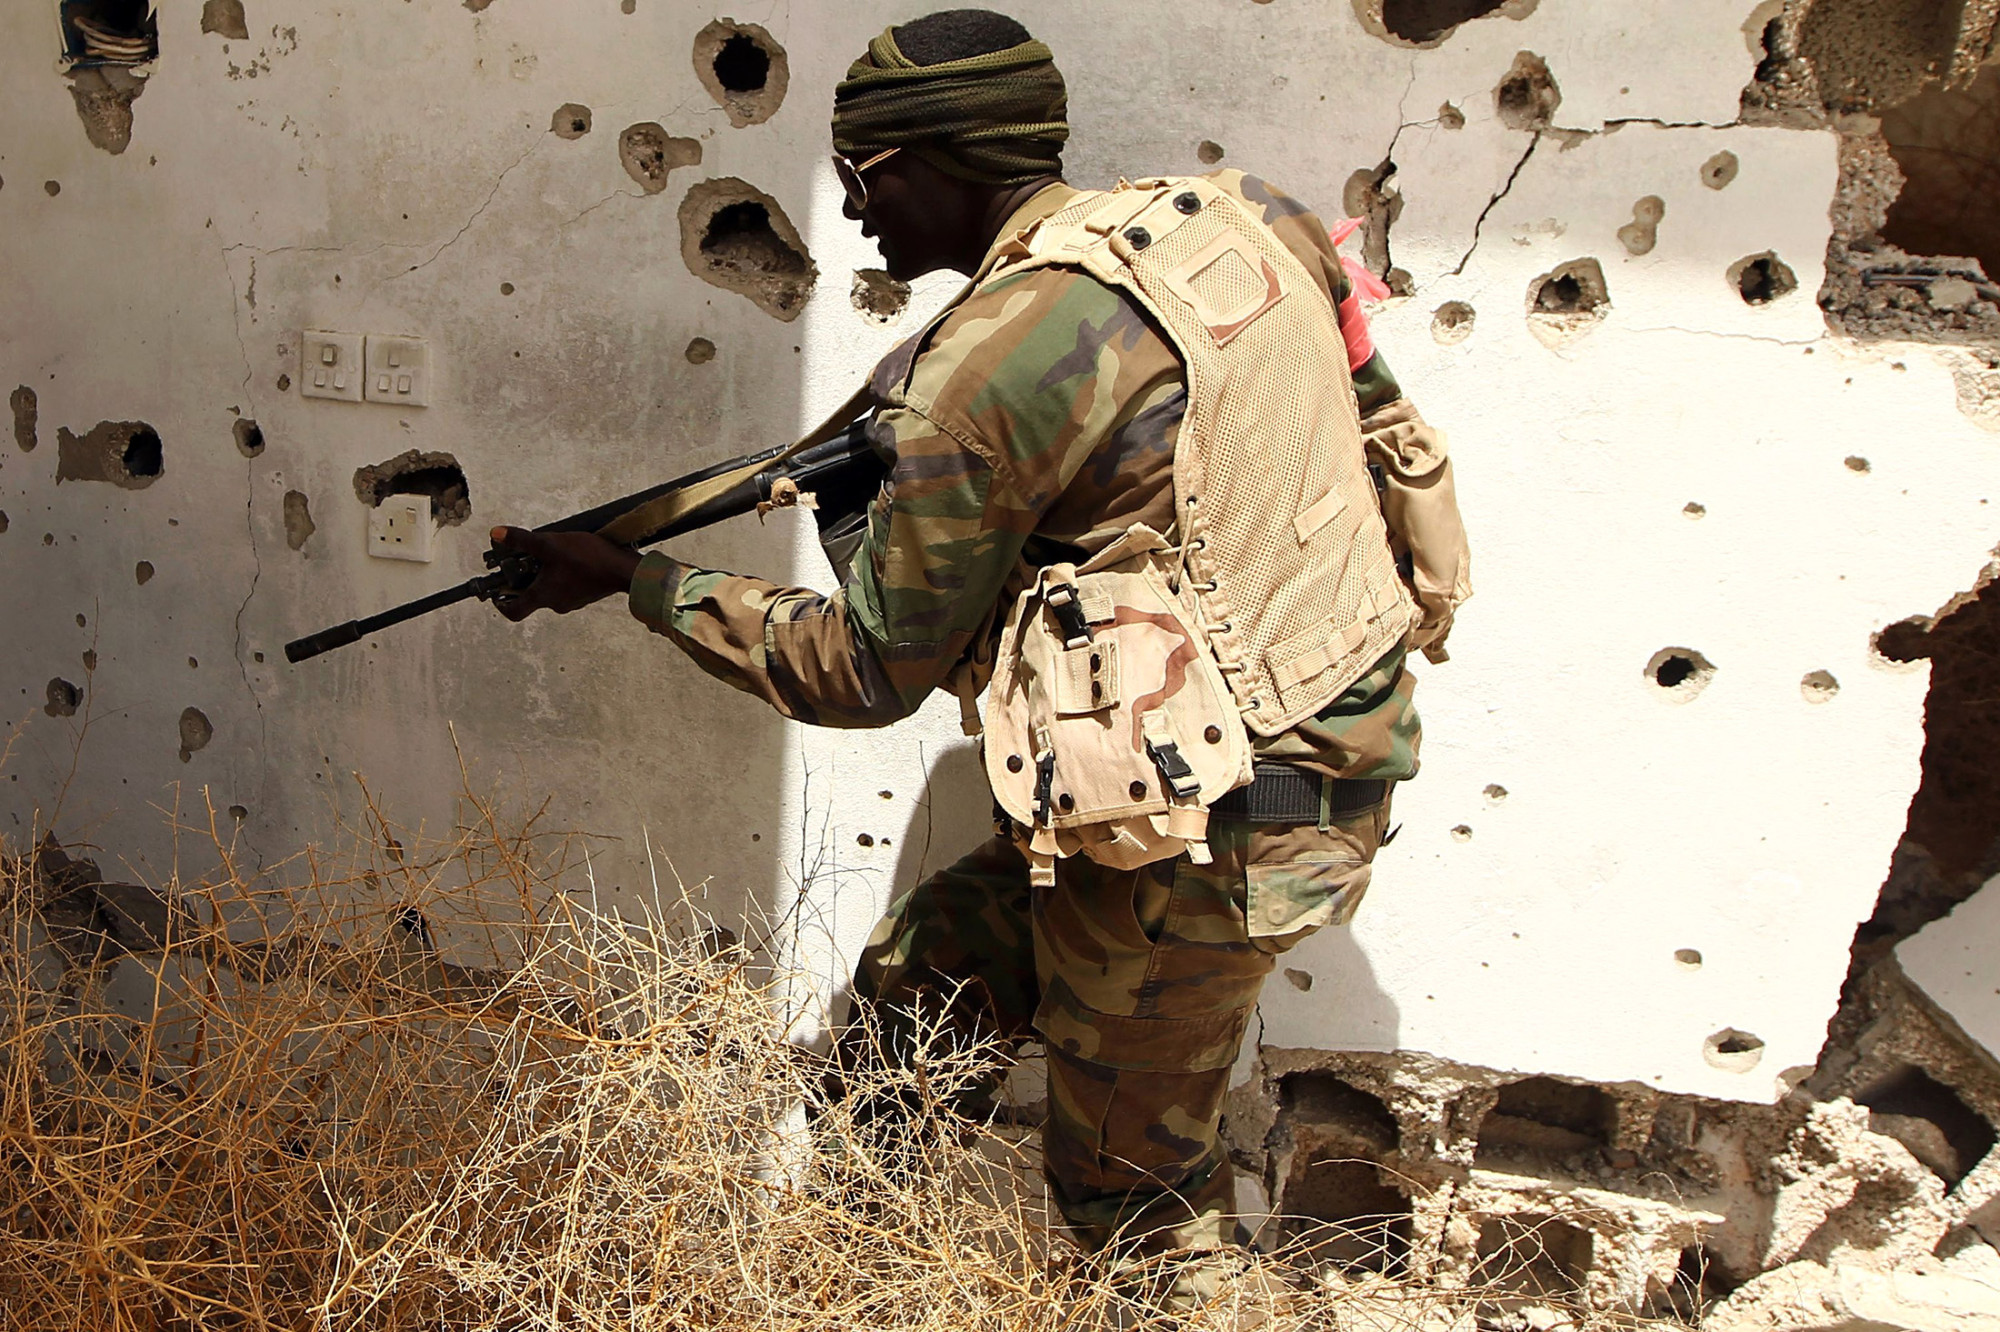 A member of the Libyan pro-government forces patrols a rural area on the outskirts of Benghazi, on April 19, 2016.
